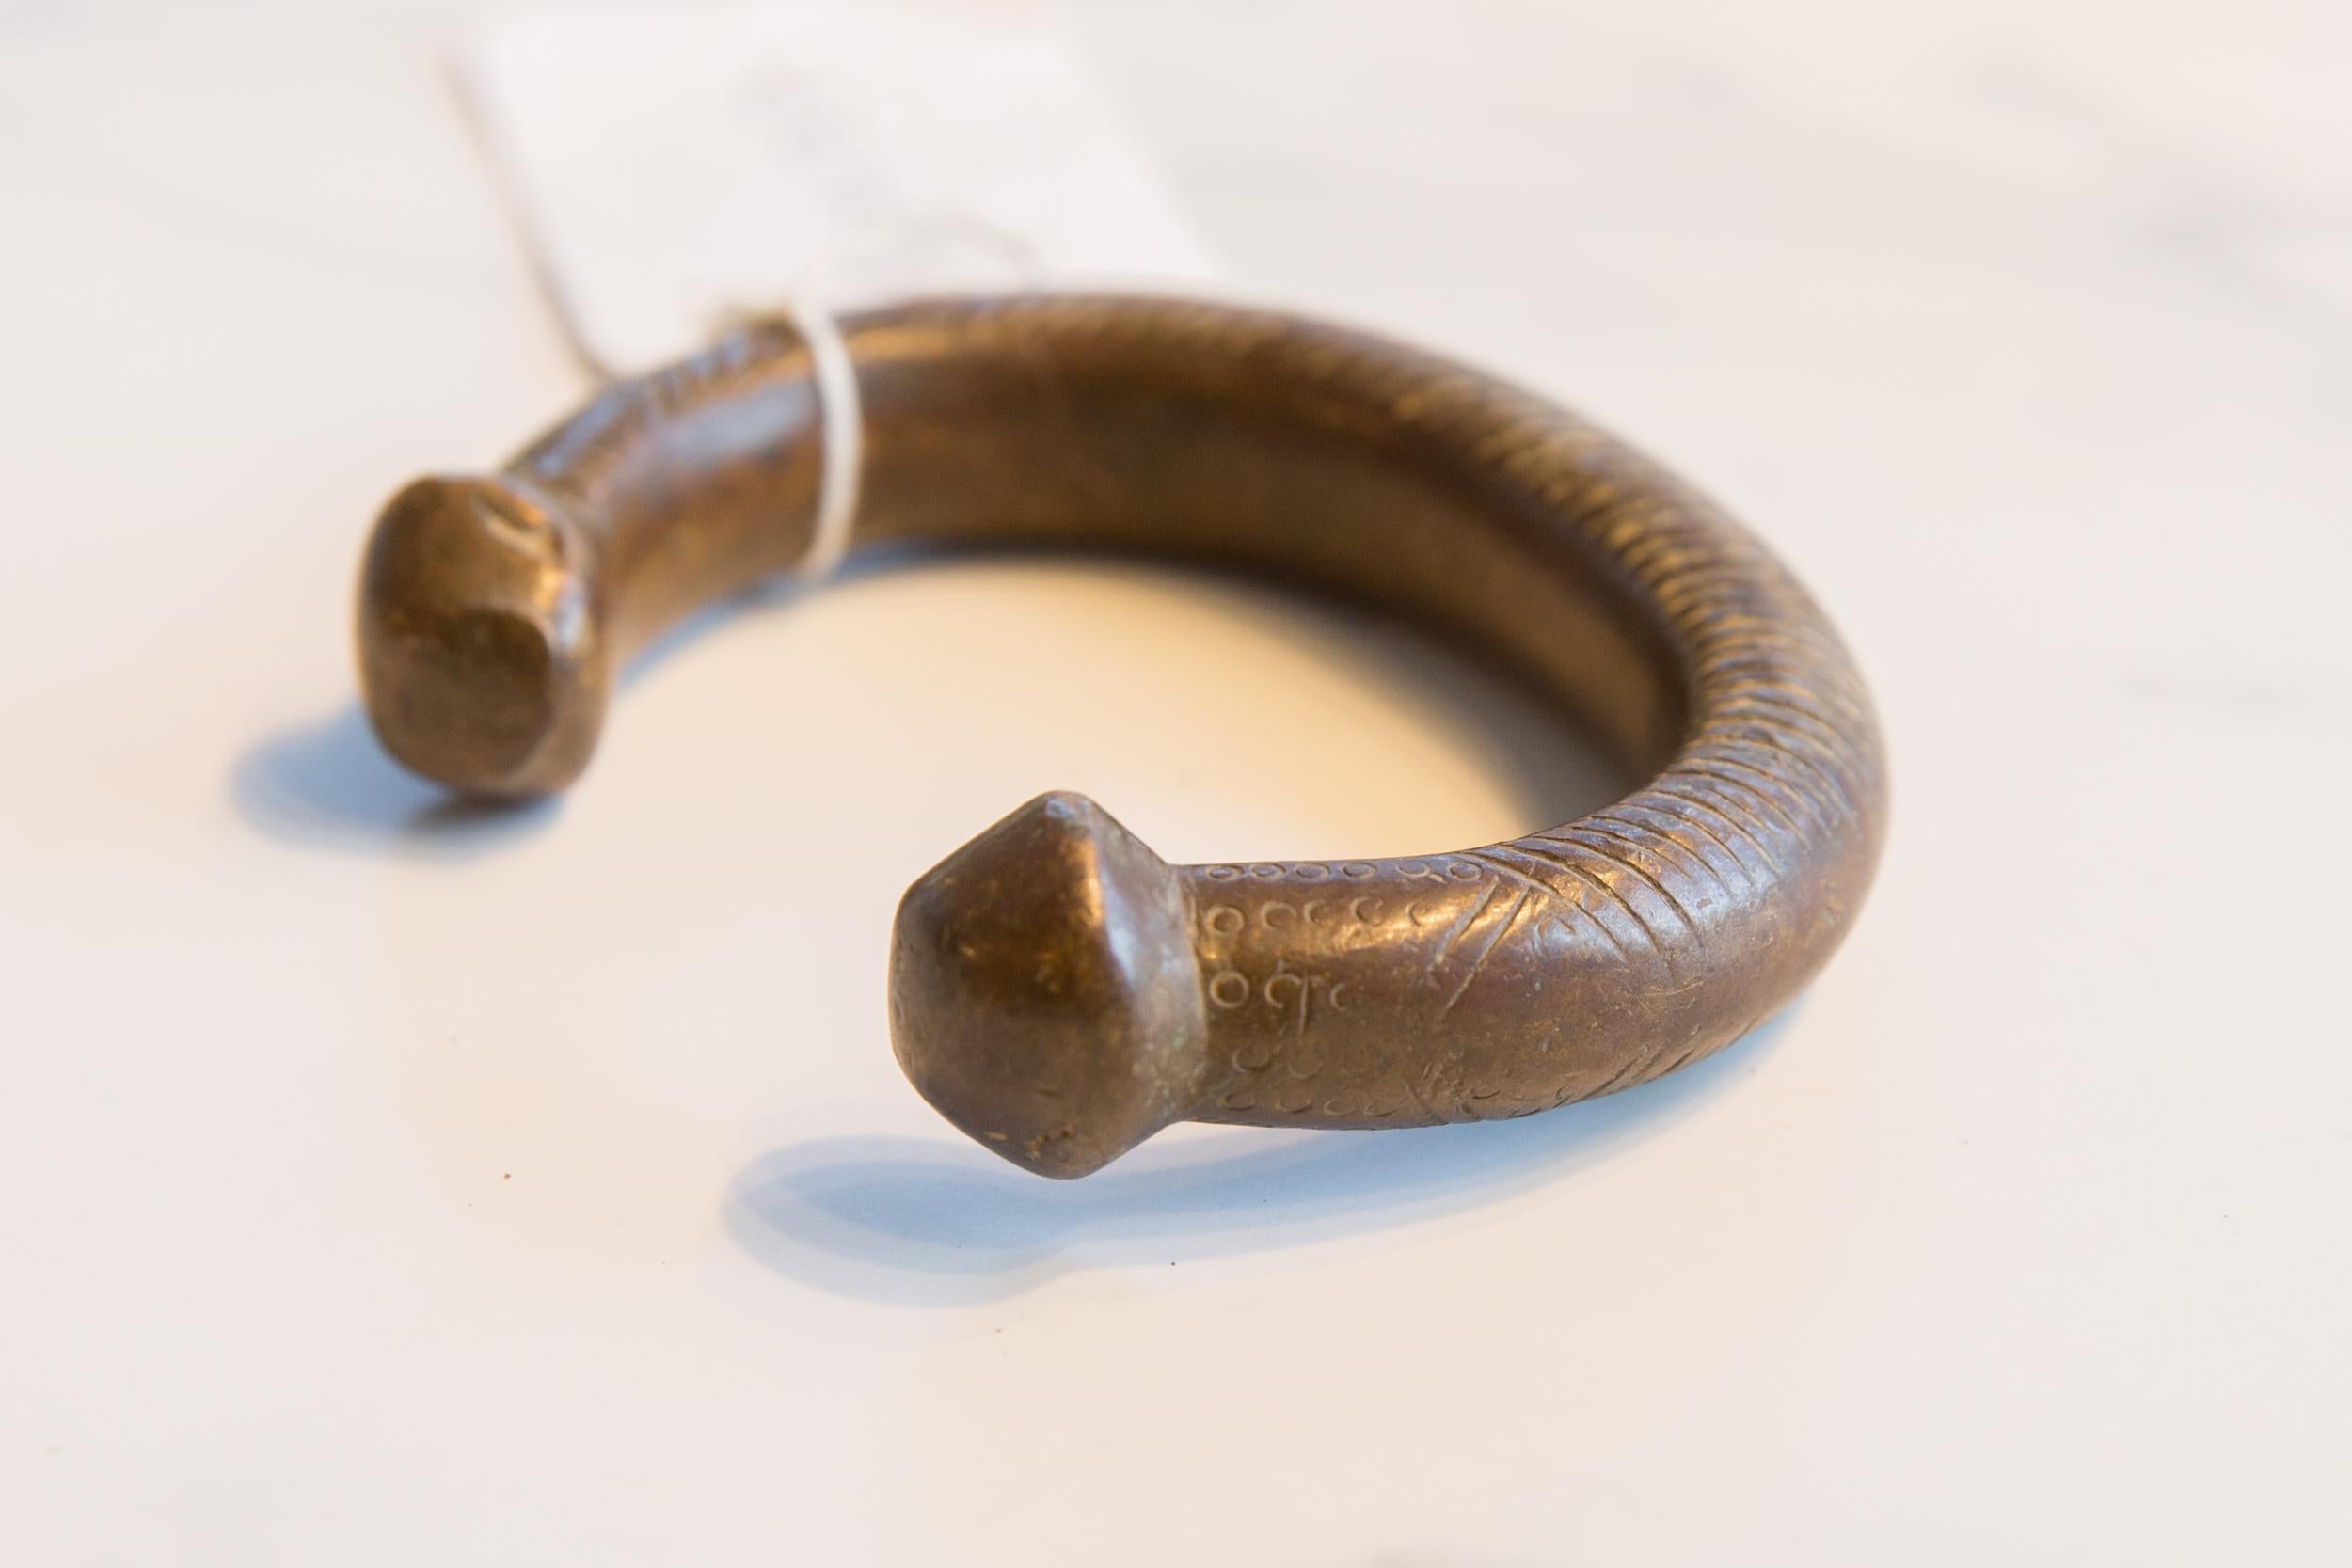 :: Antique handmade African bronze snake cuff bracelet. Exceptional antique circa early 19th century or older bracelet. Thought to be worn in order to protect the wearer from snake bites, though possibly used for currency as well. This piece is